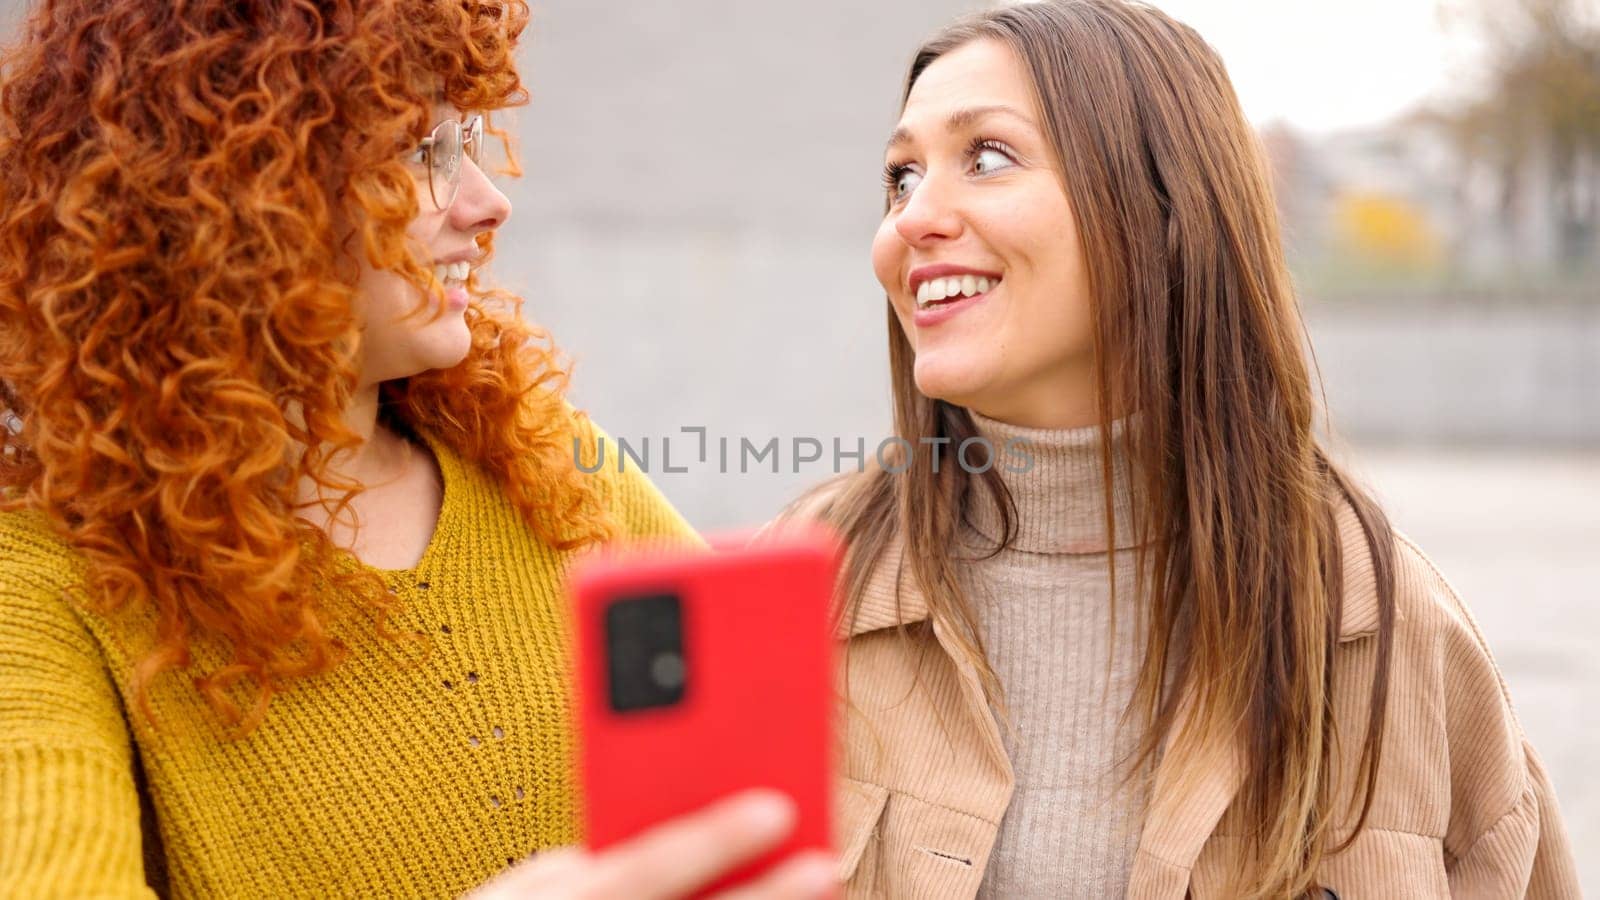 Female friends surprised while using phone together by ivanmoreno